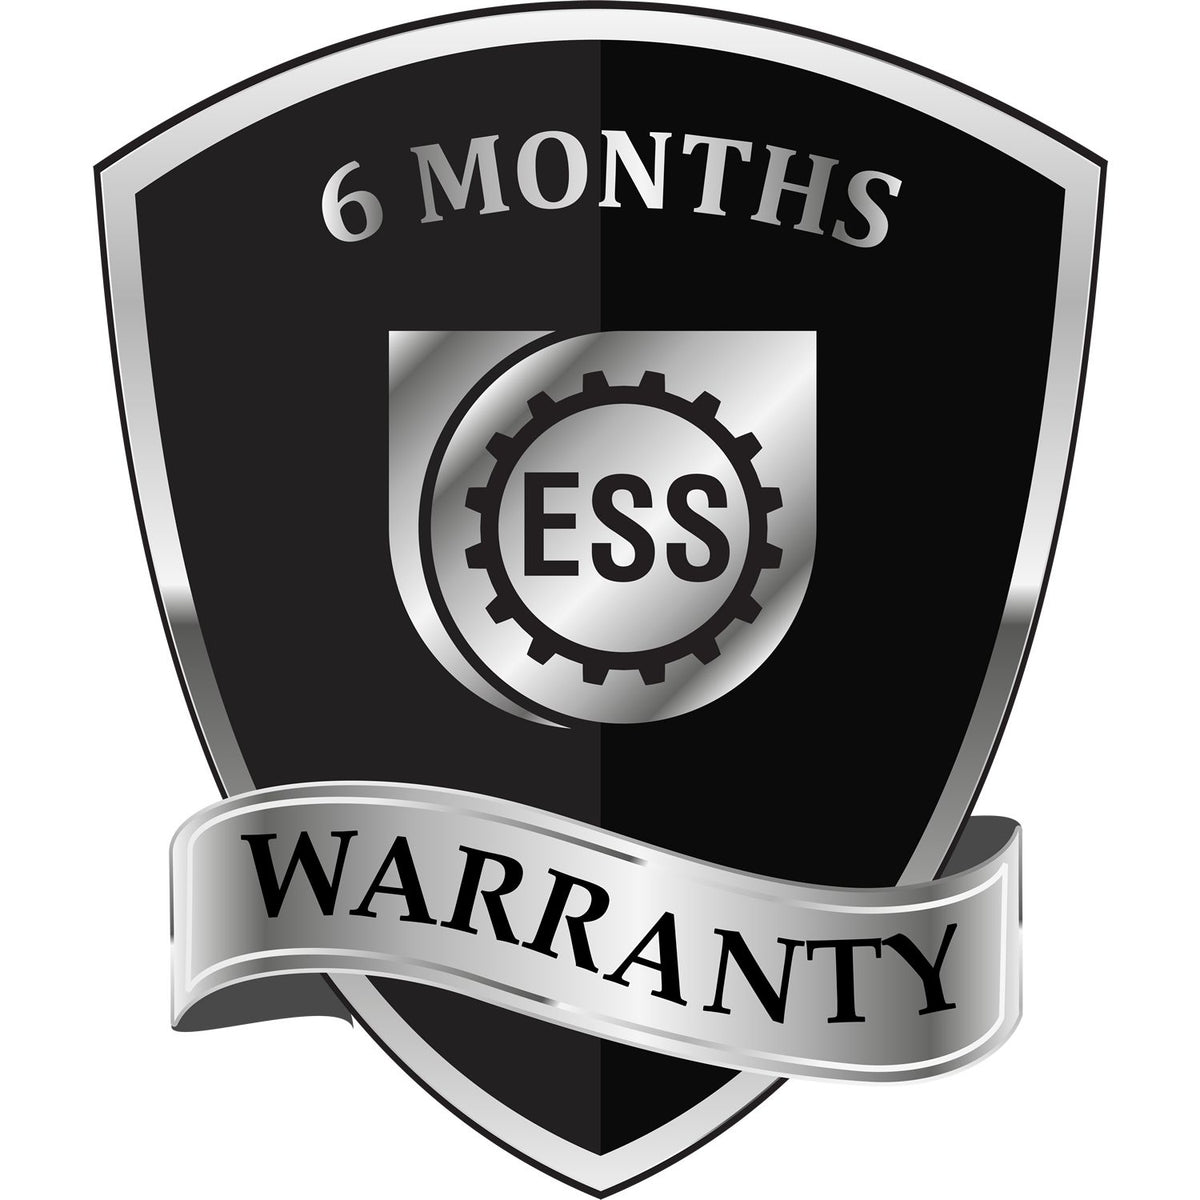 A badge or emblem showing a warranty icon for the Florida Professional Engineer Seal Stamp